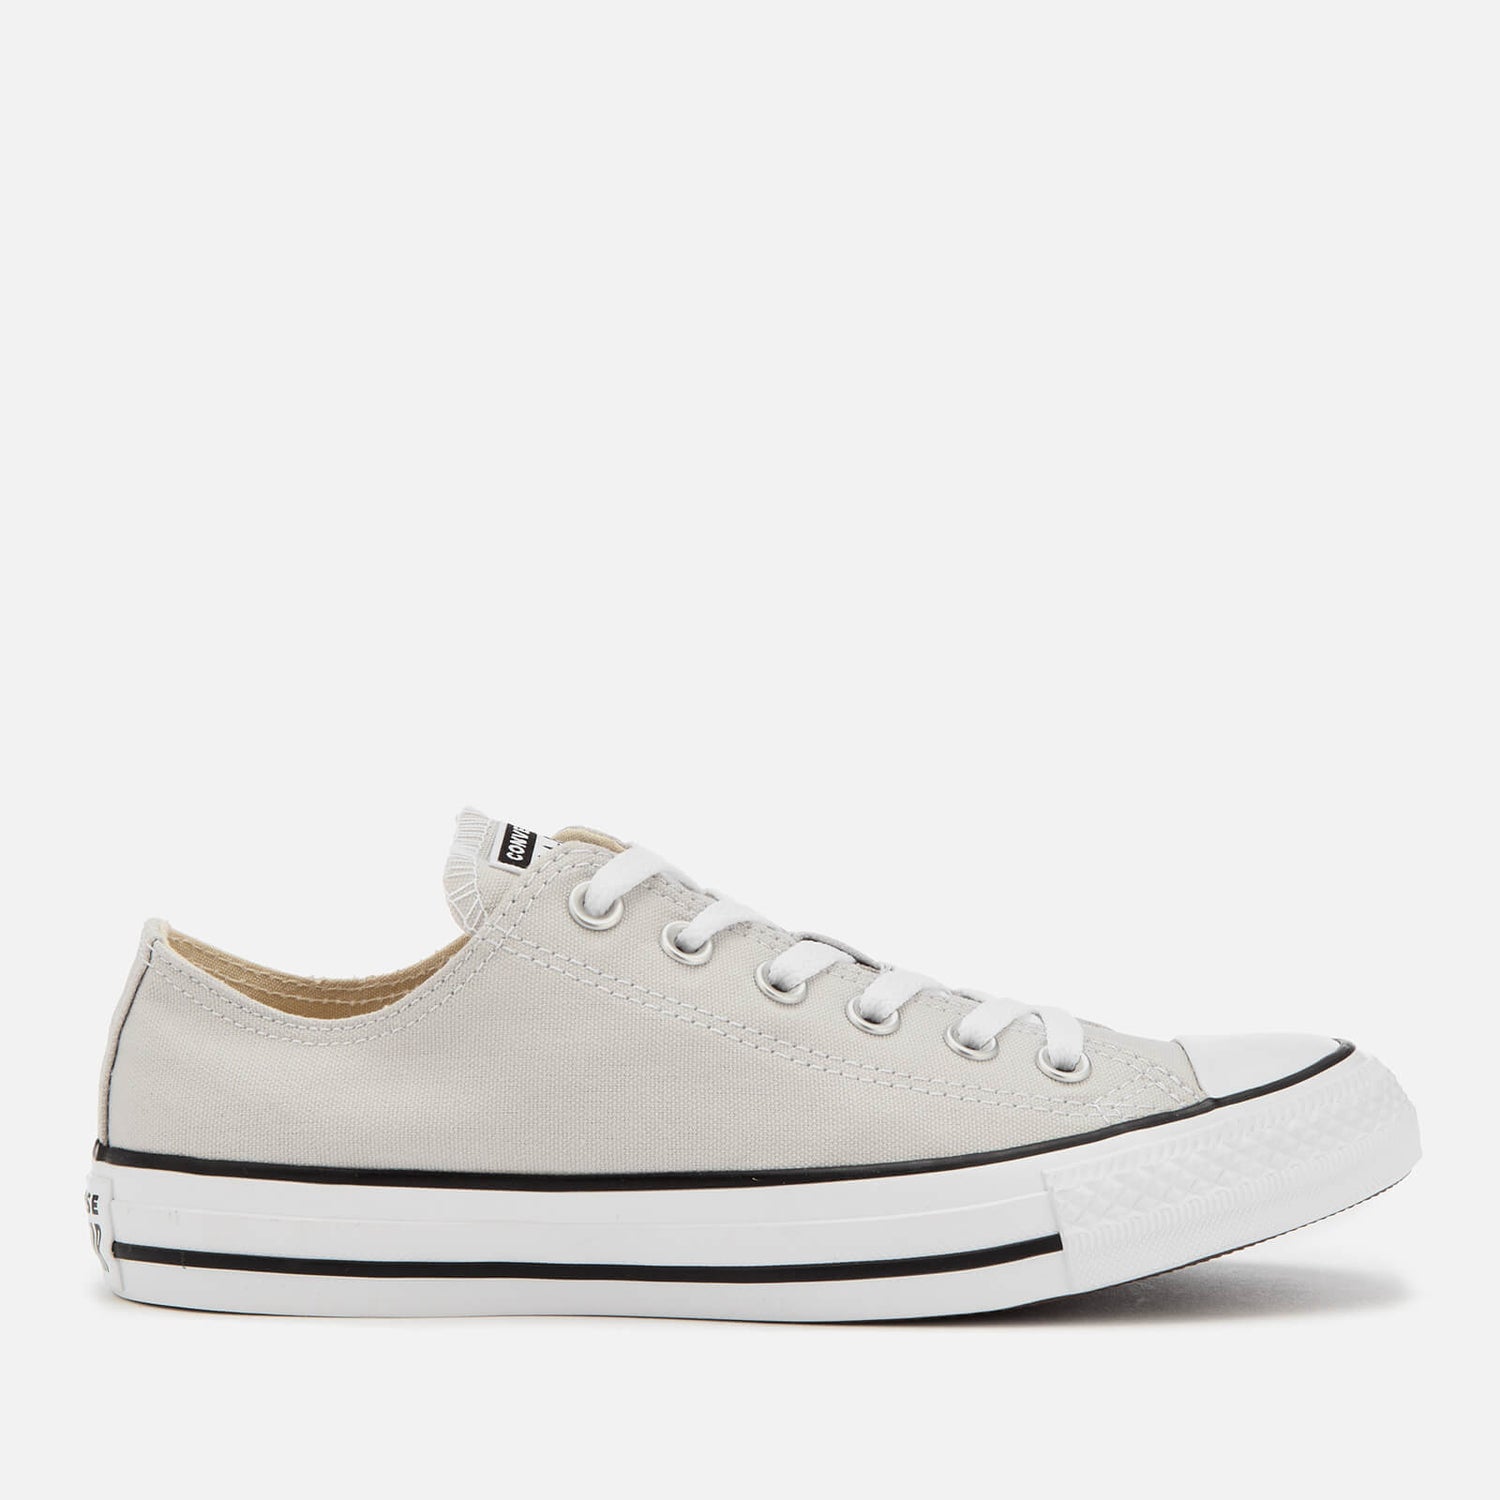 Converse Chuck Taylor All Star Seasonal Ox Trainers - Mouse Grey | FREE ...